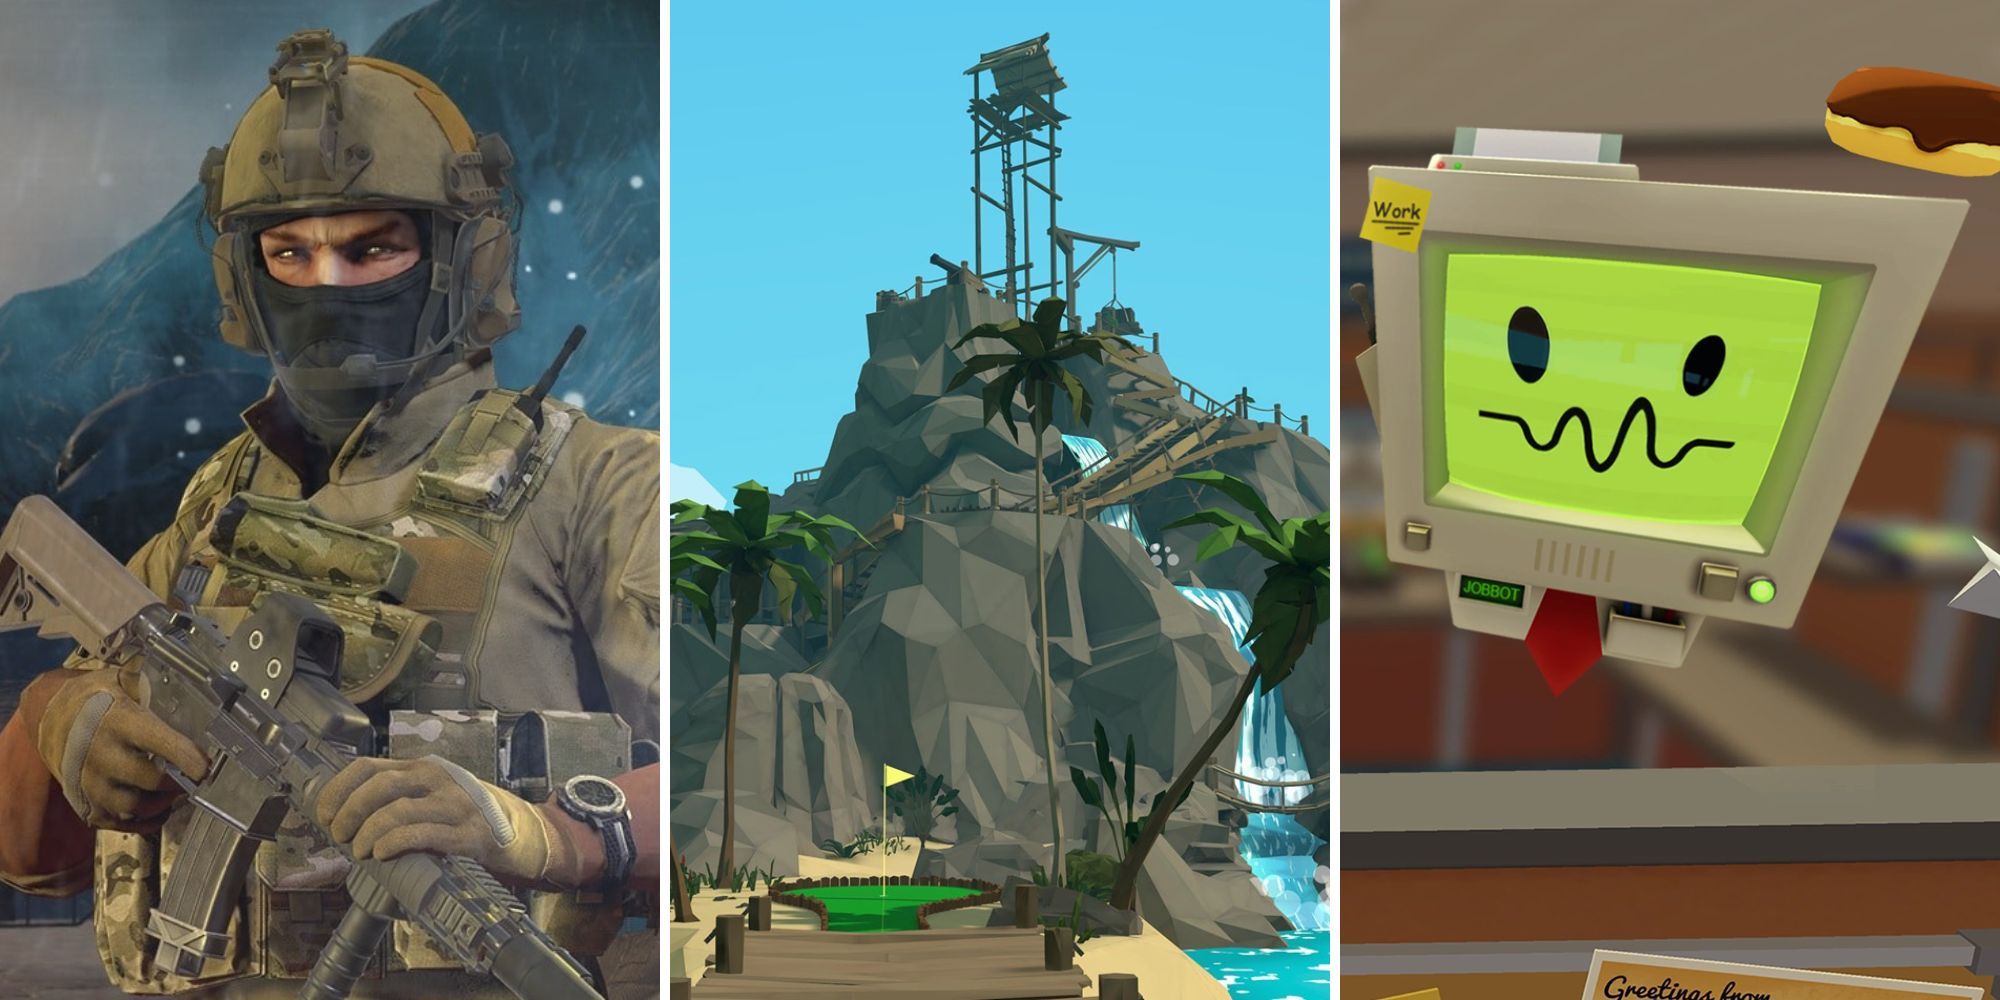 An image showing the games Onward, Walkabout Mini Golf, and Job Simulator that can be played on the Meta Quest 2